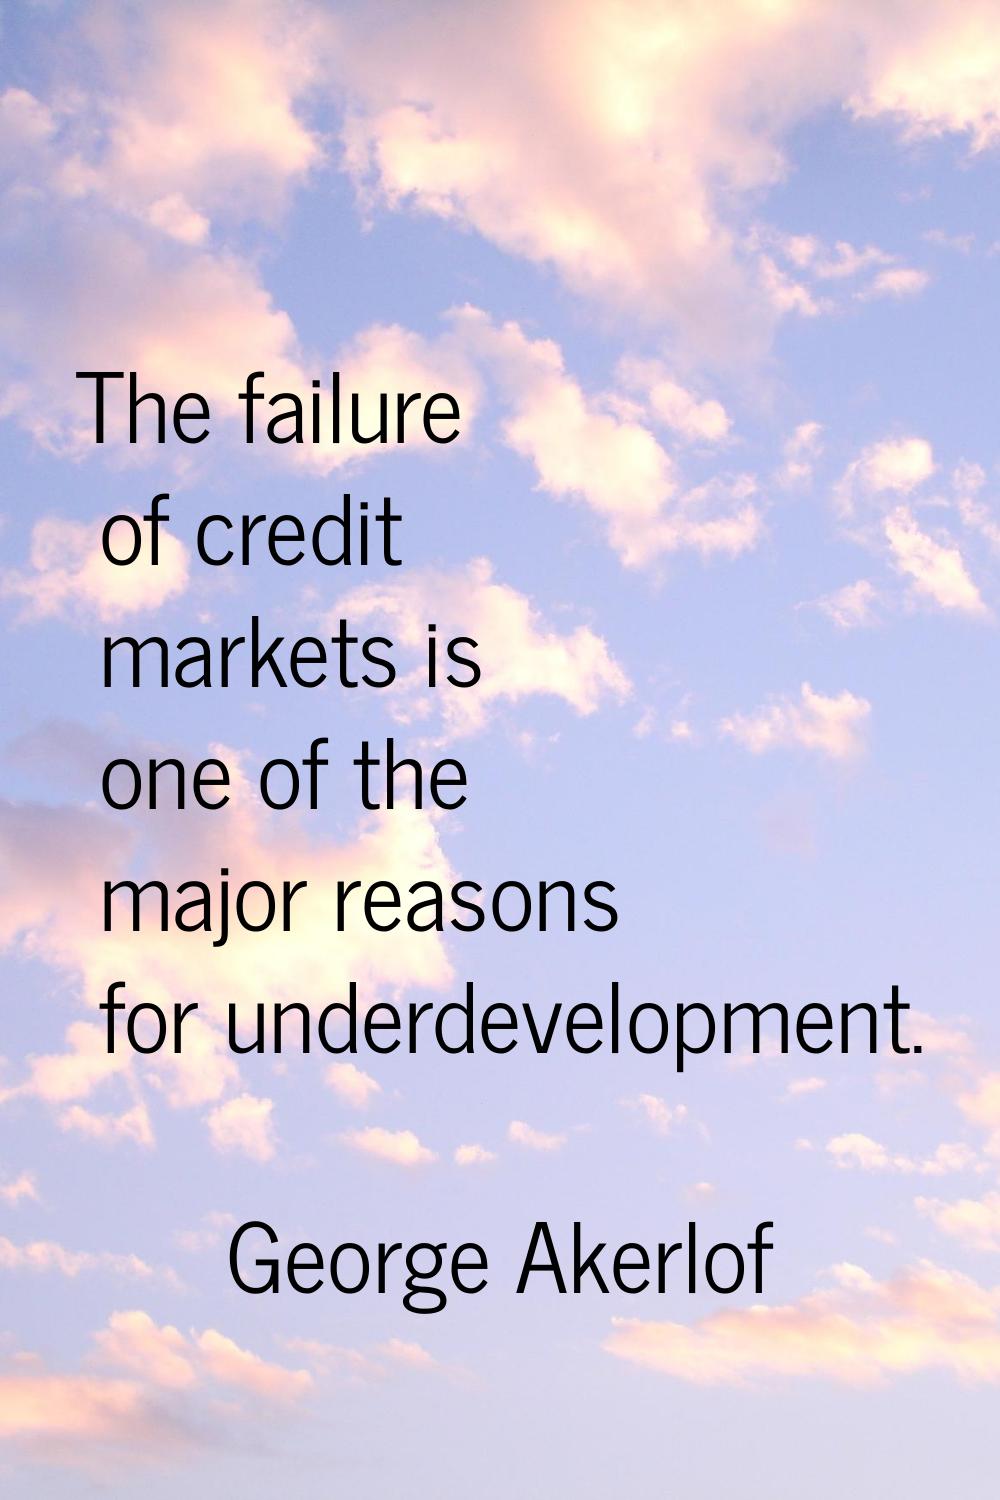 The failure of credit markets is one of the major reasons for underdevelopment.